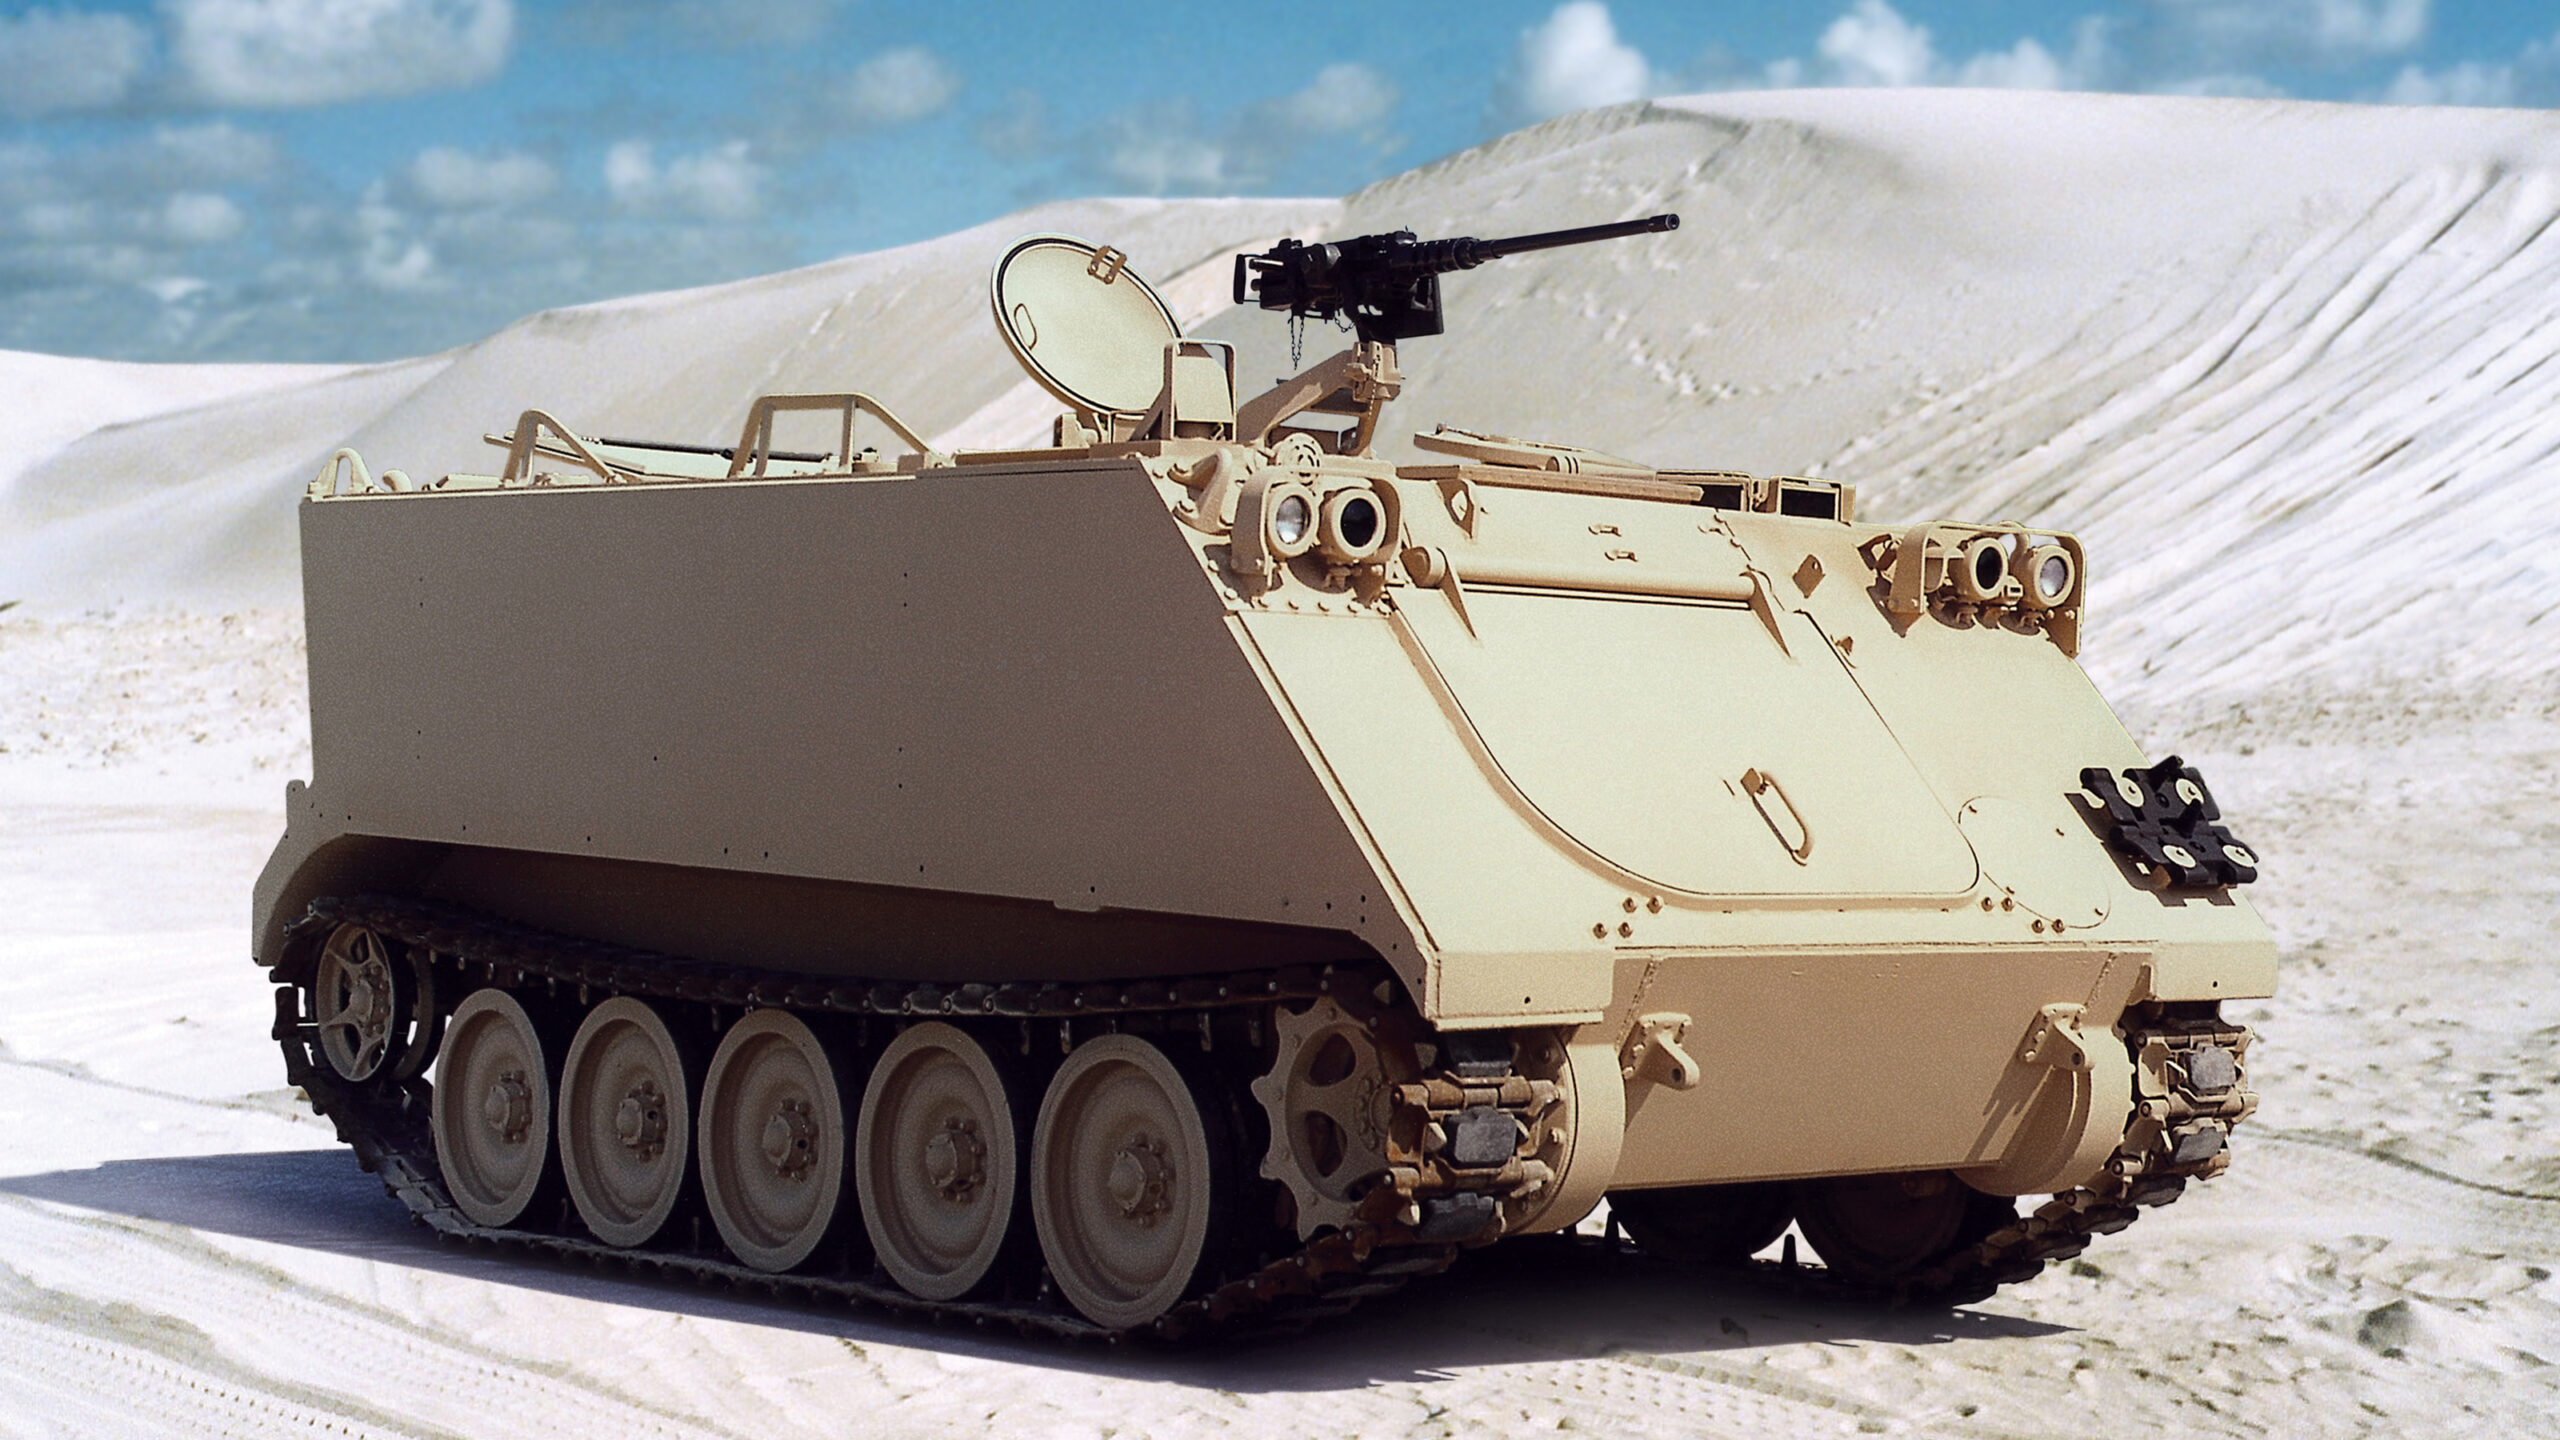 M113 Armored Personnel Carrier.